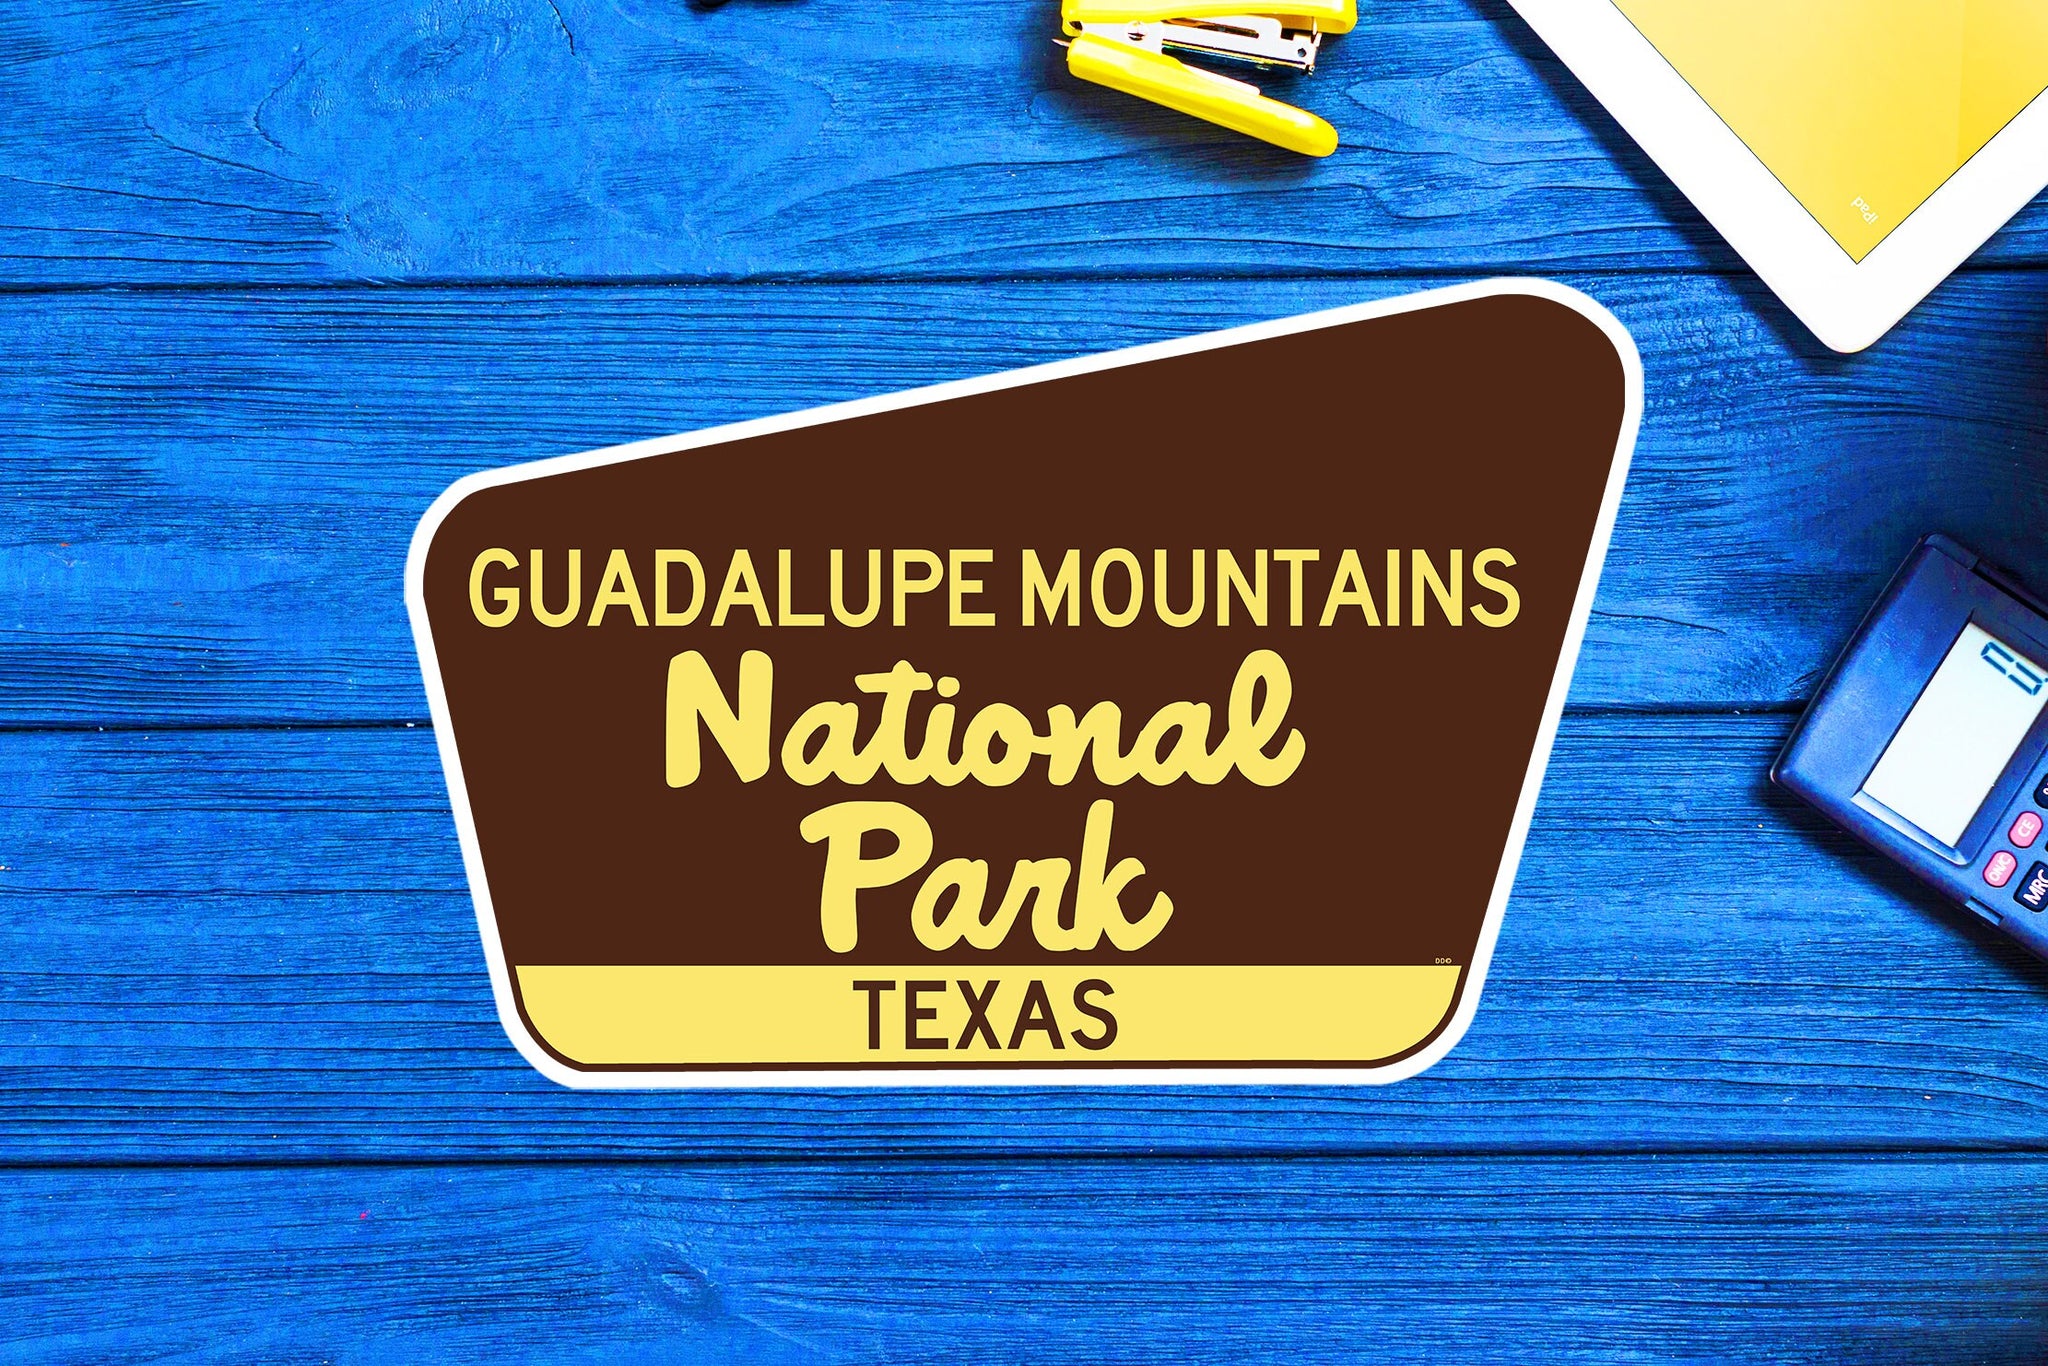 Guadalupe Mountains National Park Texas Sticker 3.75" Vinyl Decal